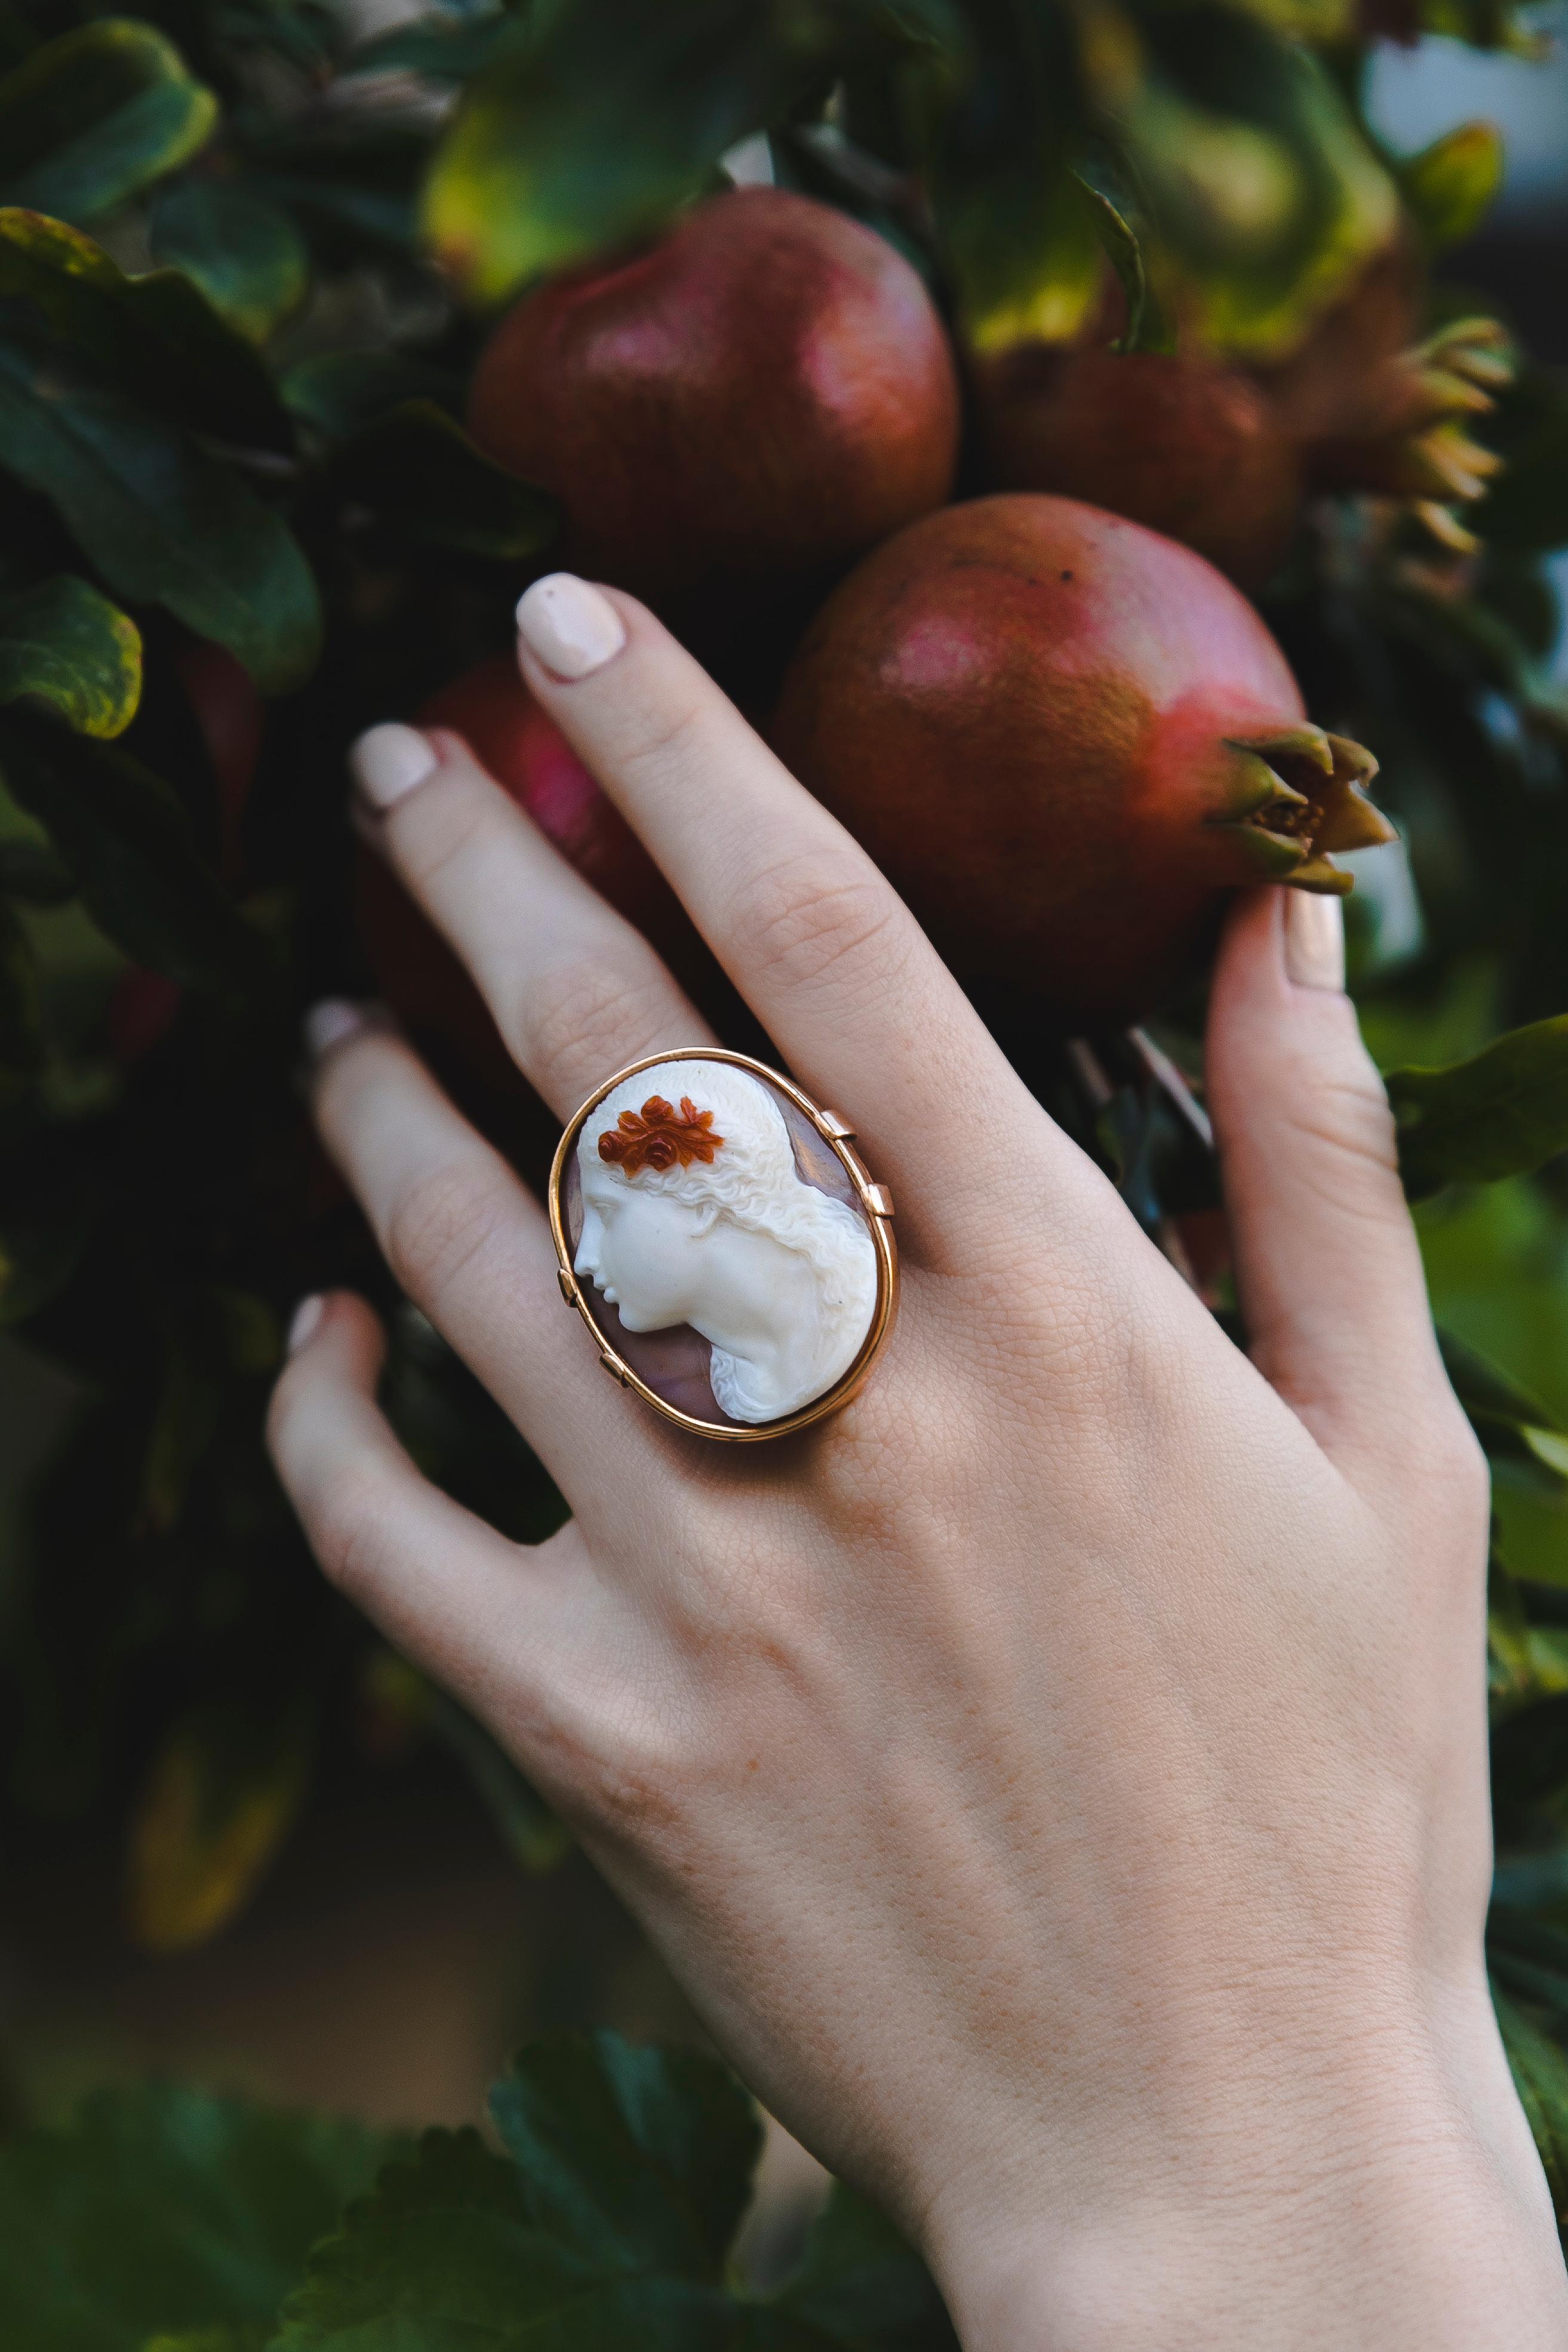 Carnelian 3 Layer Cameo Greek Revival Gold Ring. Created around the 1890.

Natural wonder meets human genius! Lady’s portrait ancient Greece style (Greek Revival) on a 3 Layer Cornelian Cameo. Created in 1890 it’s a testament to amazing jeweller